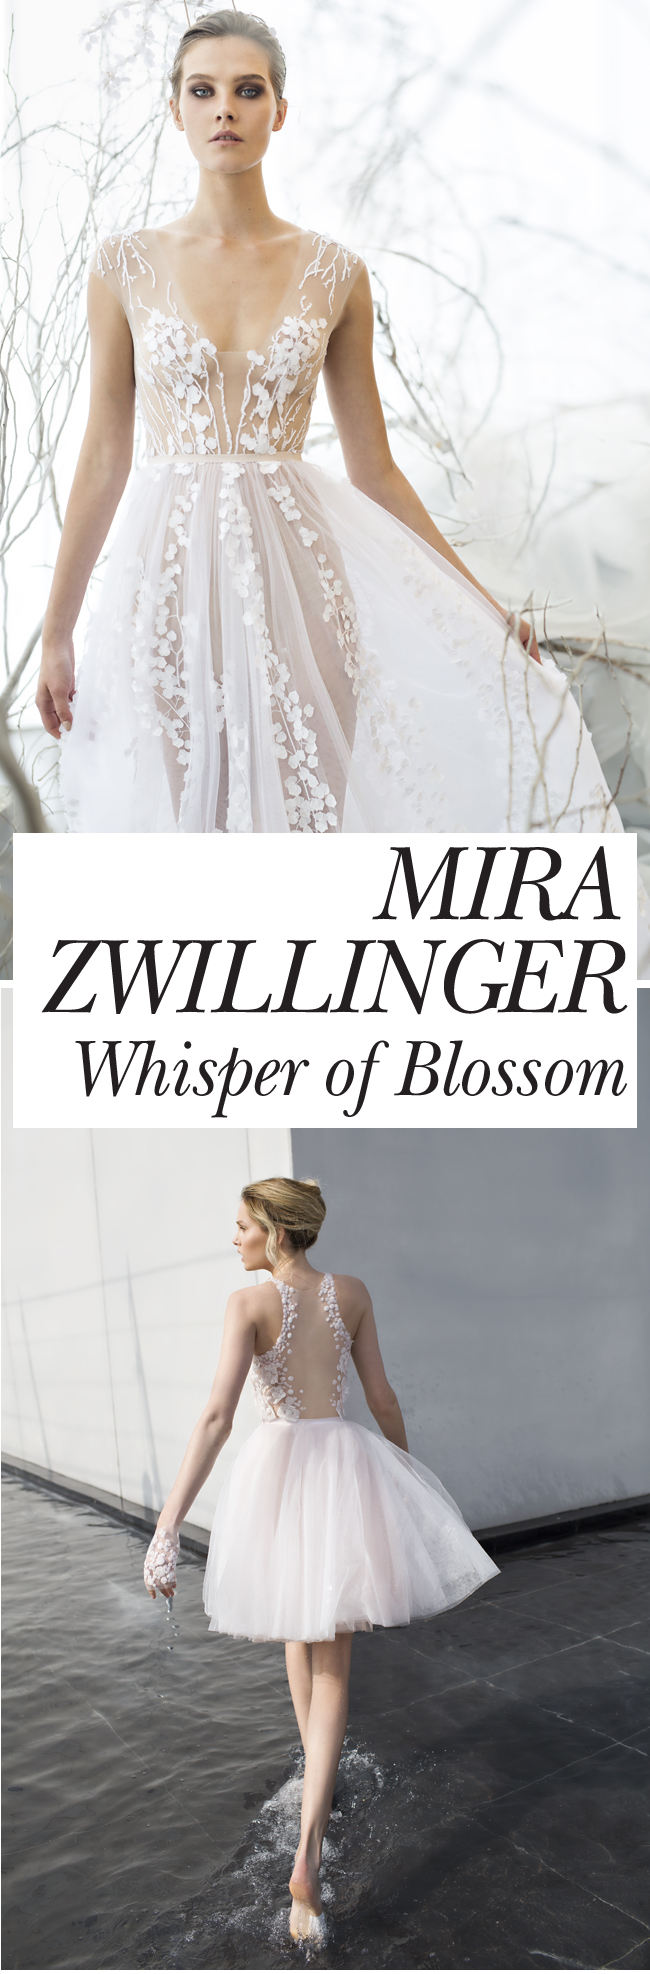 MIra Zwillinger, Whisper Bloom, Bridal Collection, Perfect wedding Magazine, Perfect wedding Blog, Floral Applique, Wedding Gowns